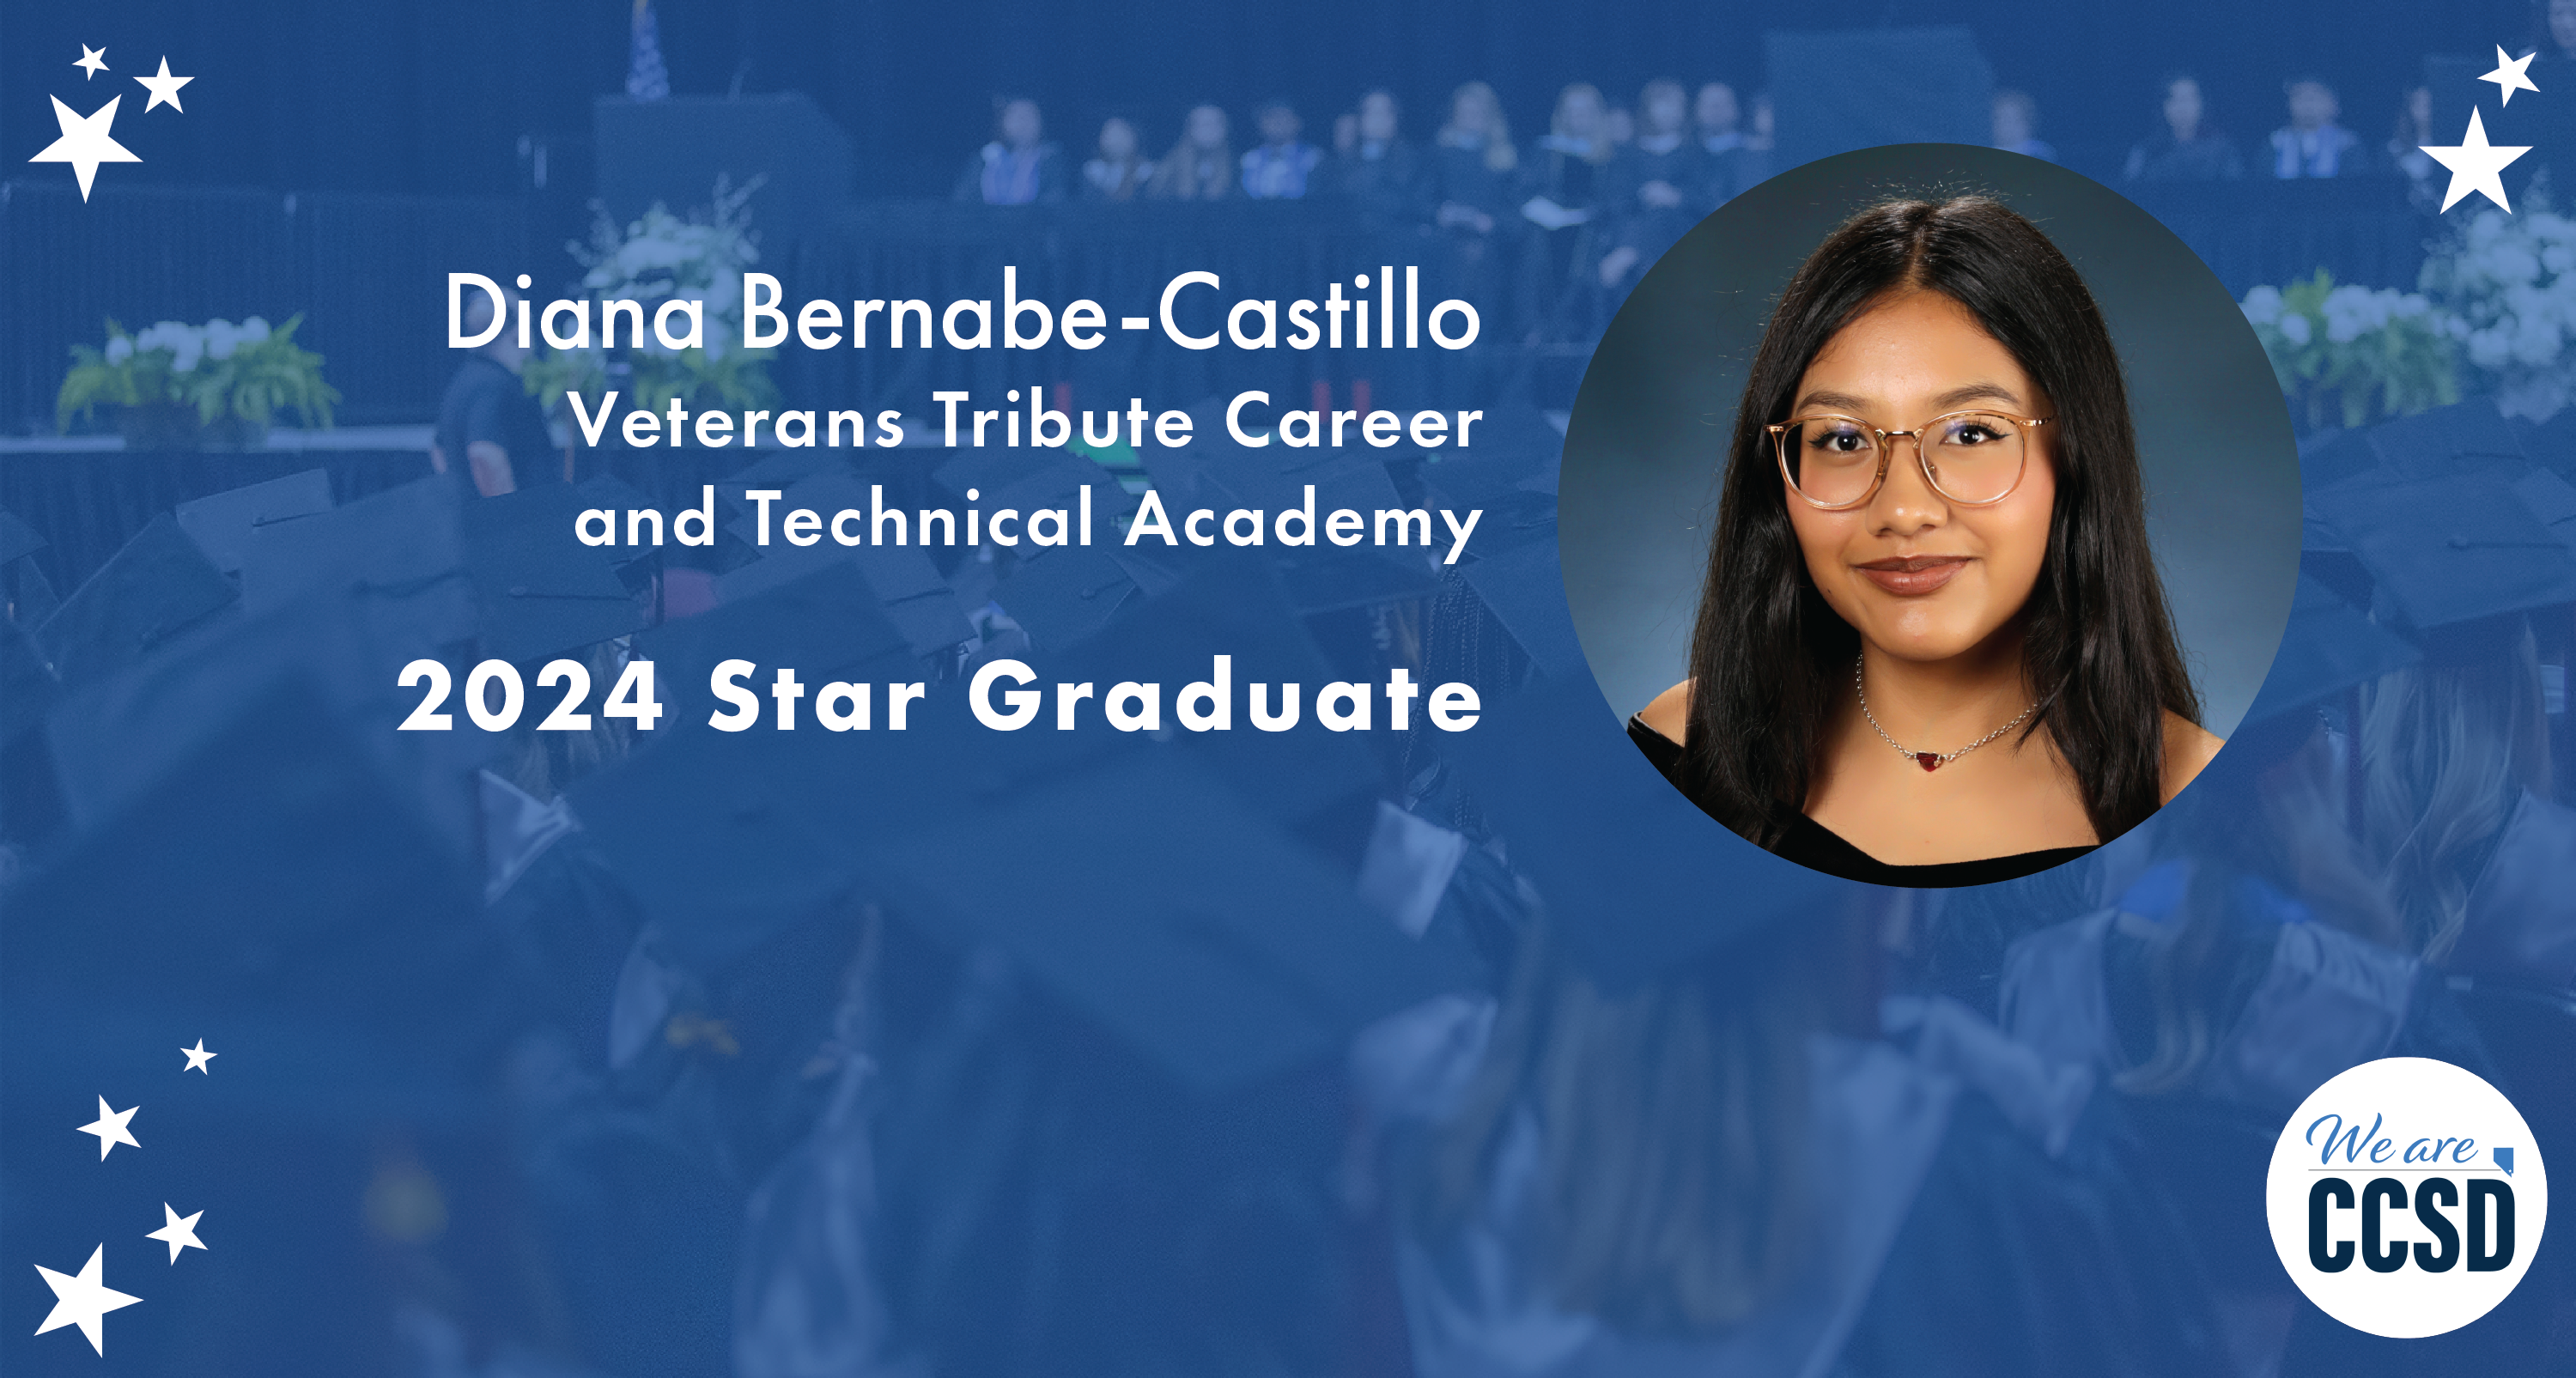 Star Grad – Veterans Tribute Career and Technical Academy